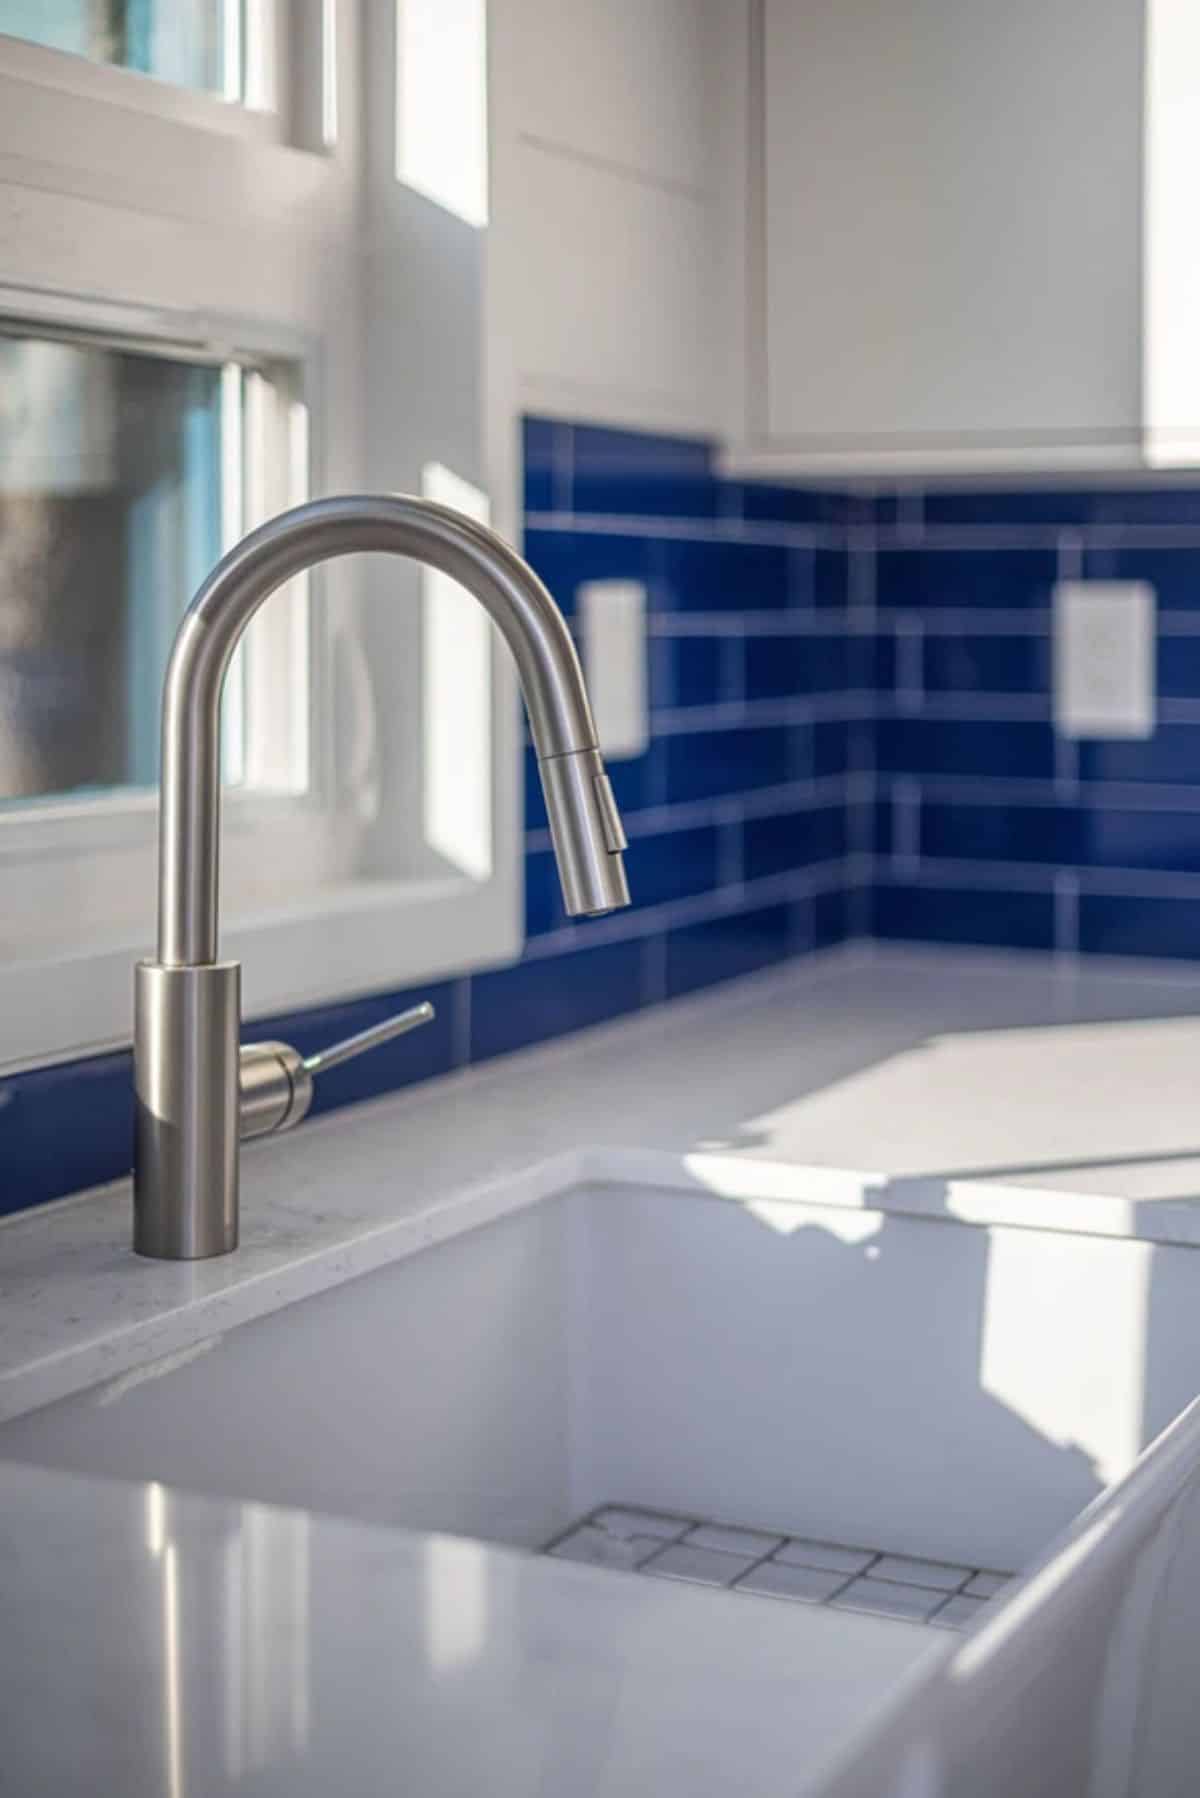 stainless steel faucet on white sink with blue tile background